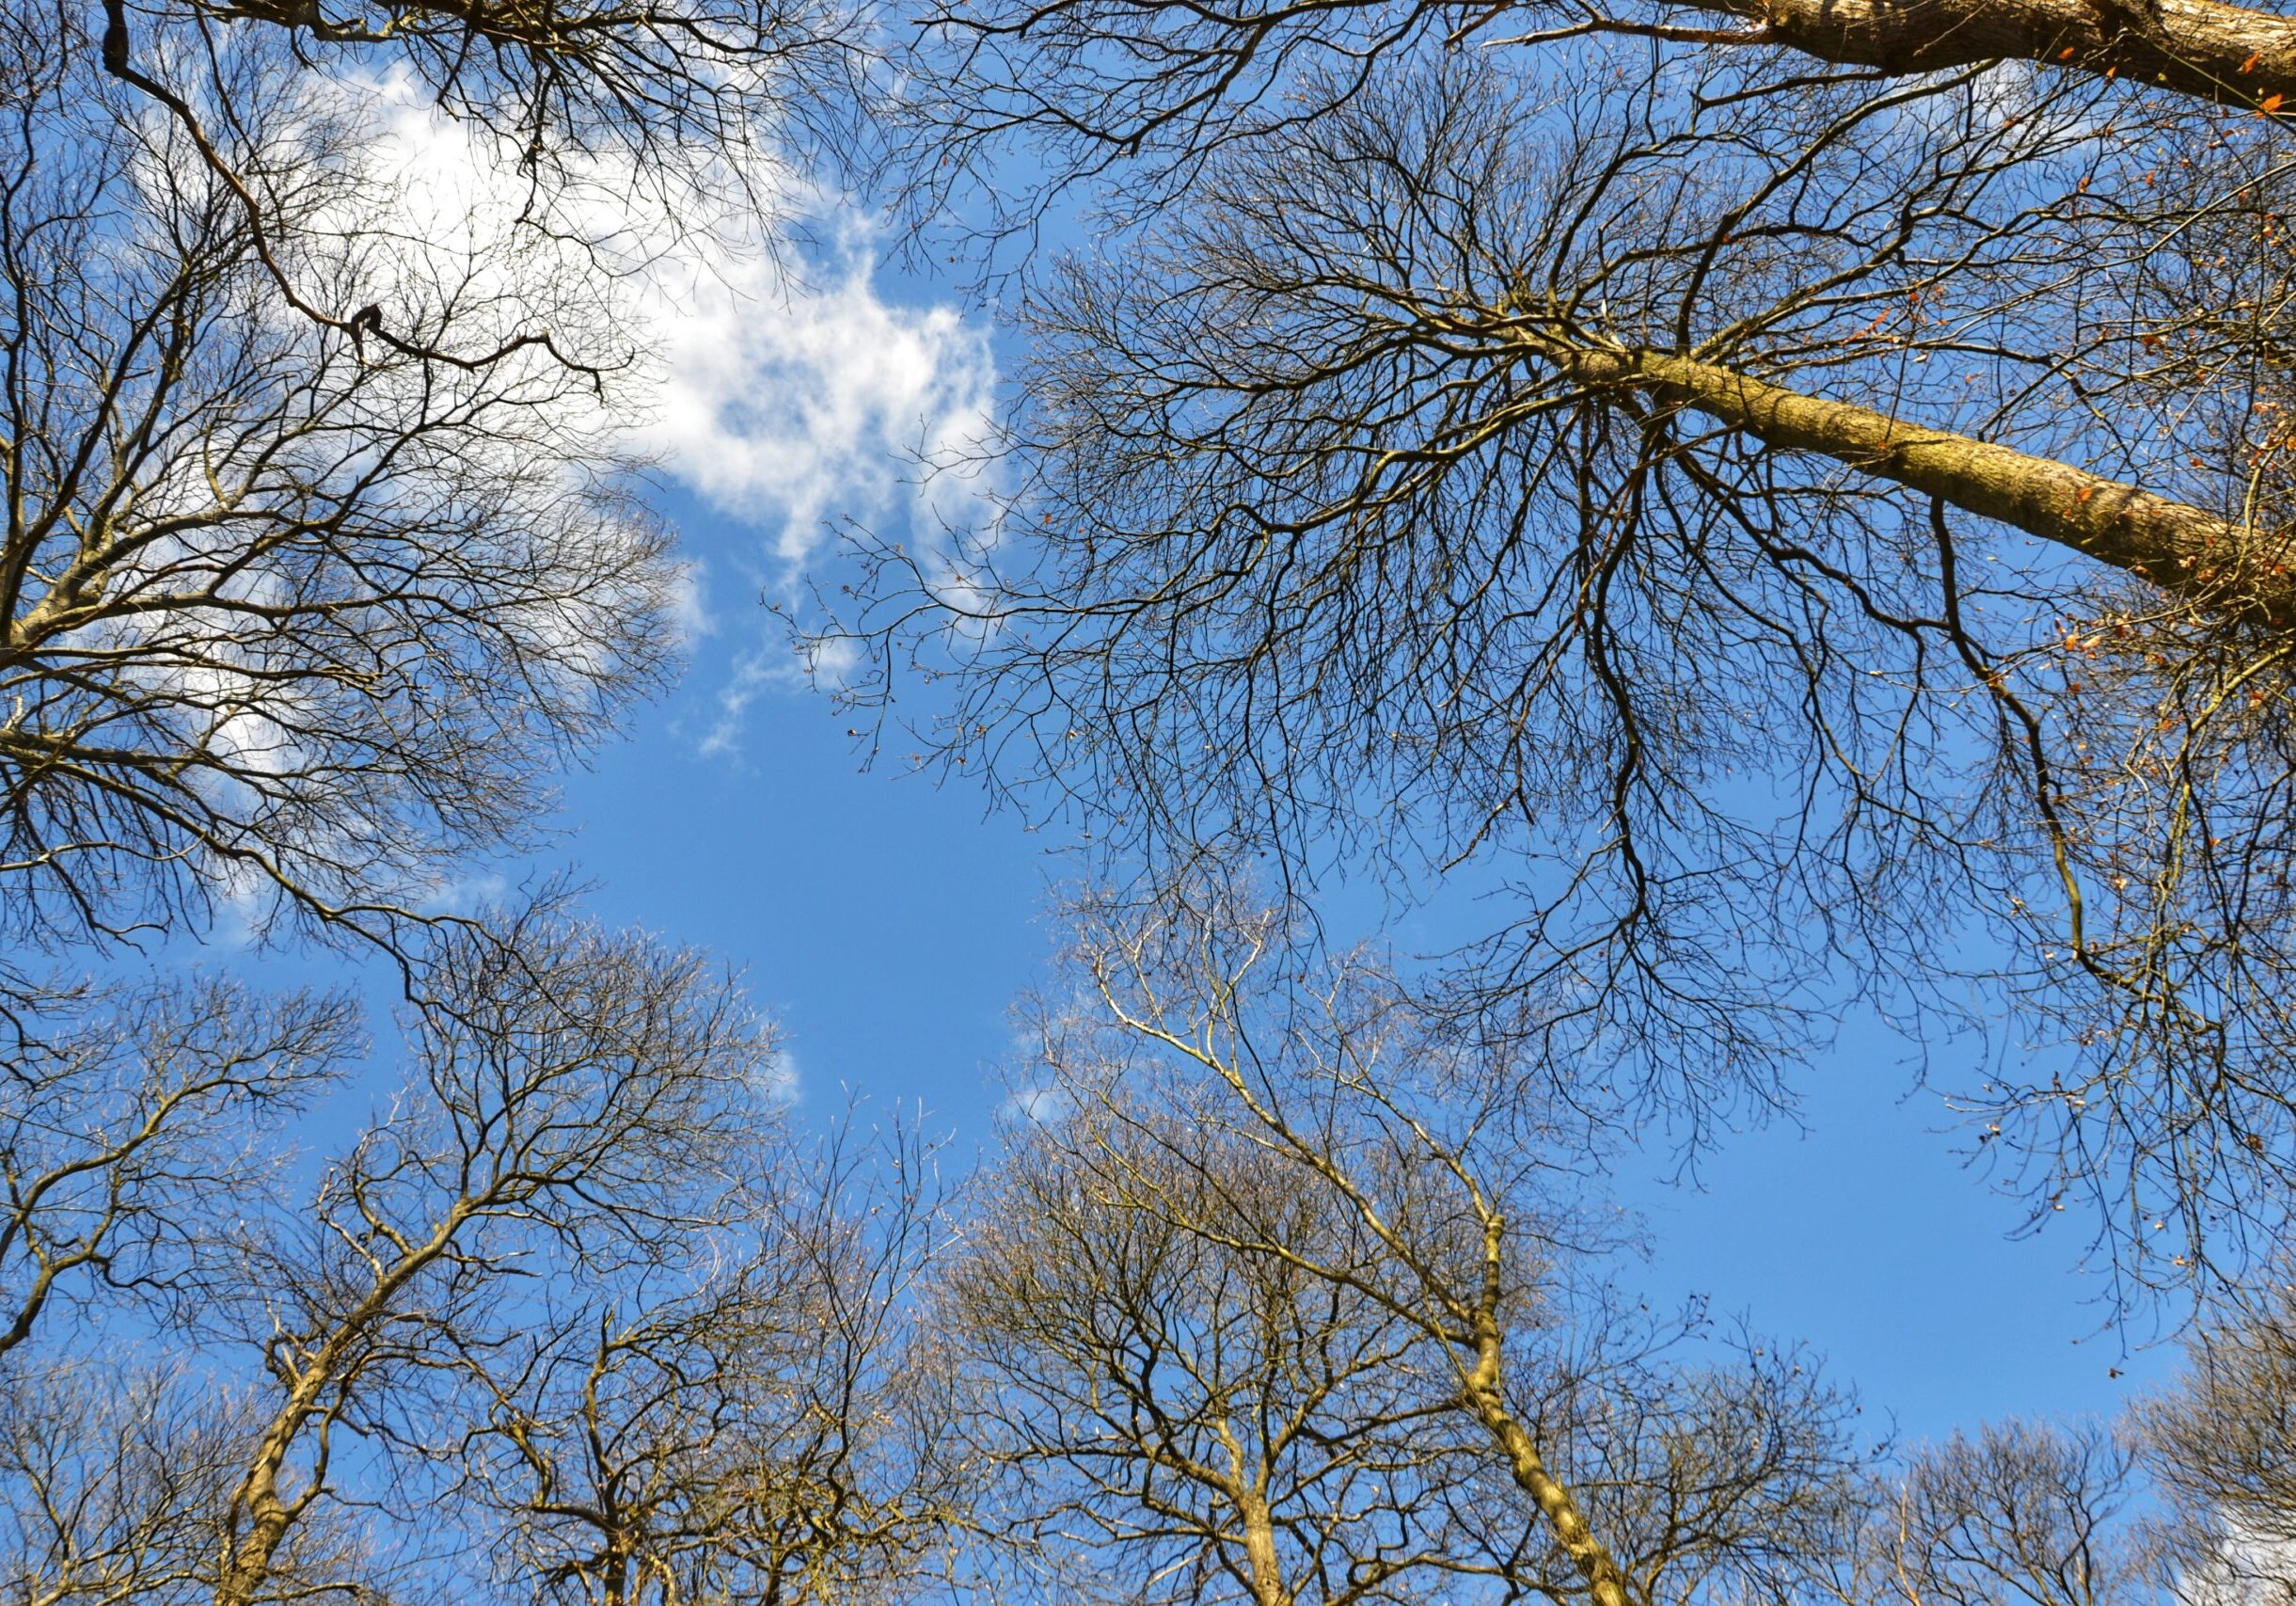 Looking up through the trees to a beautiful blue sky